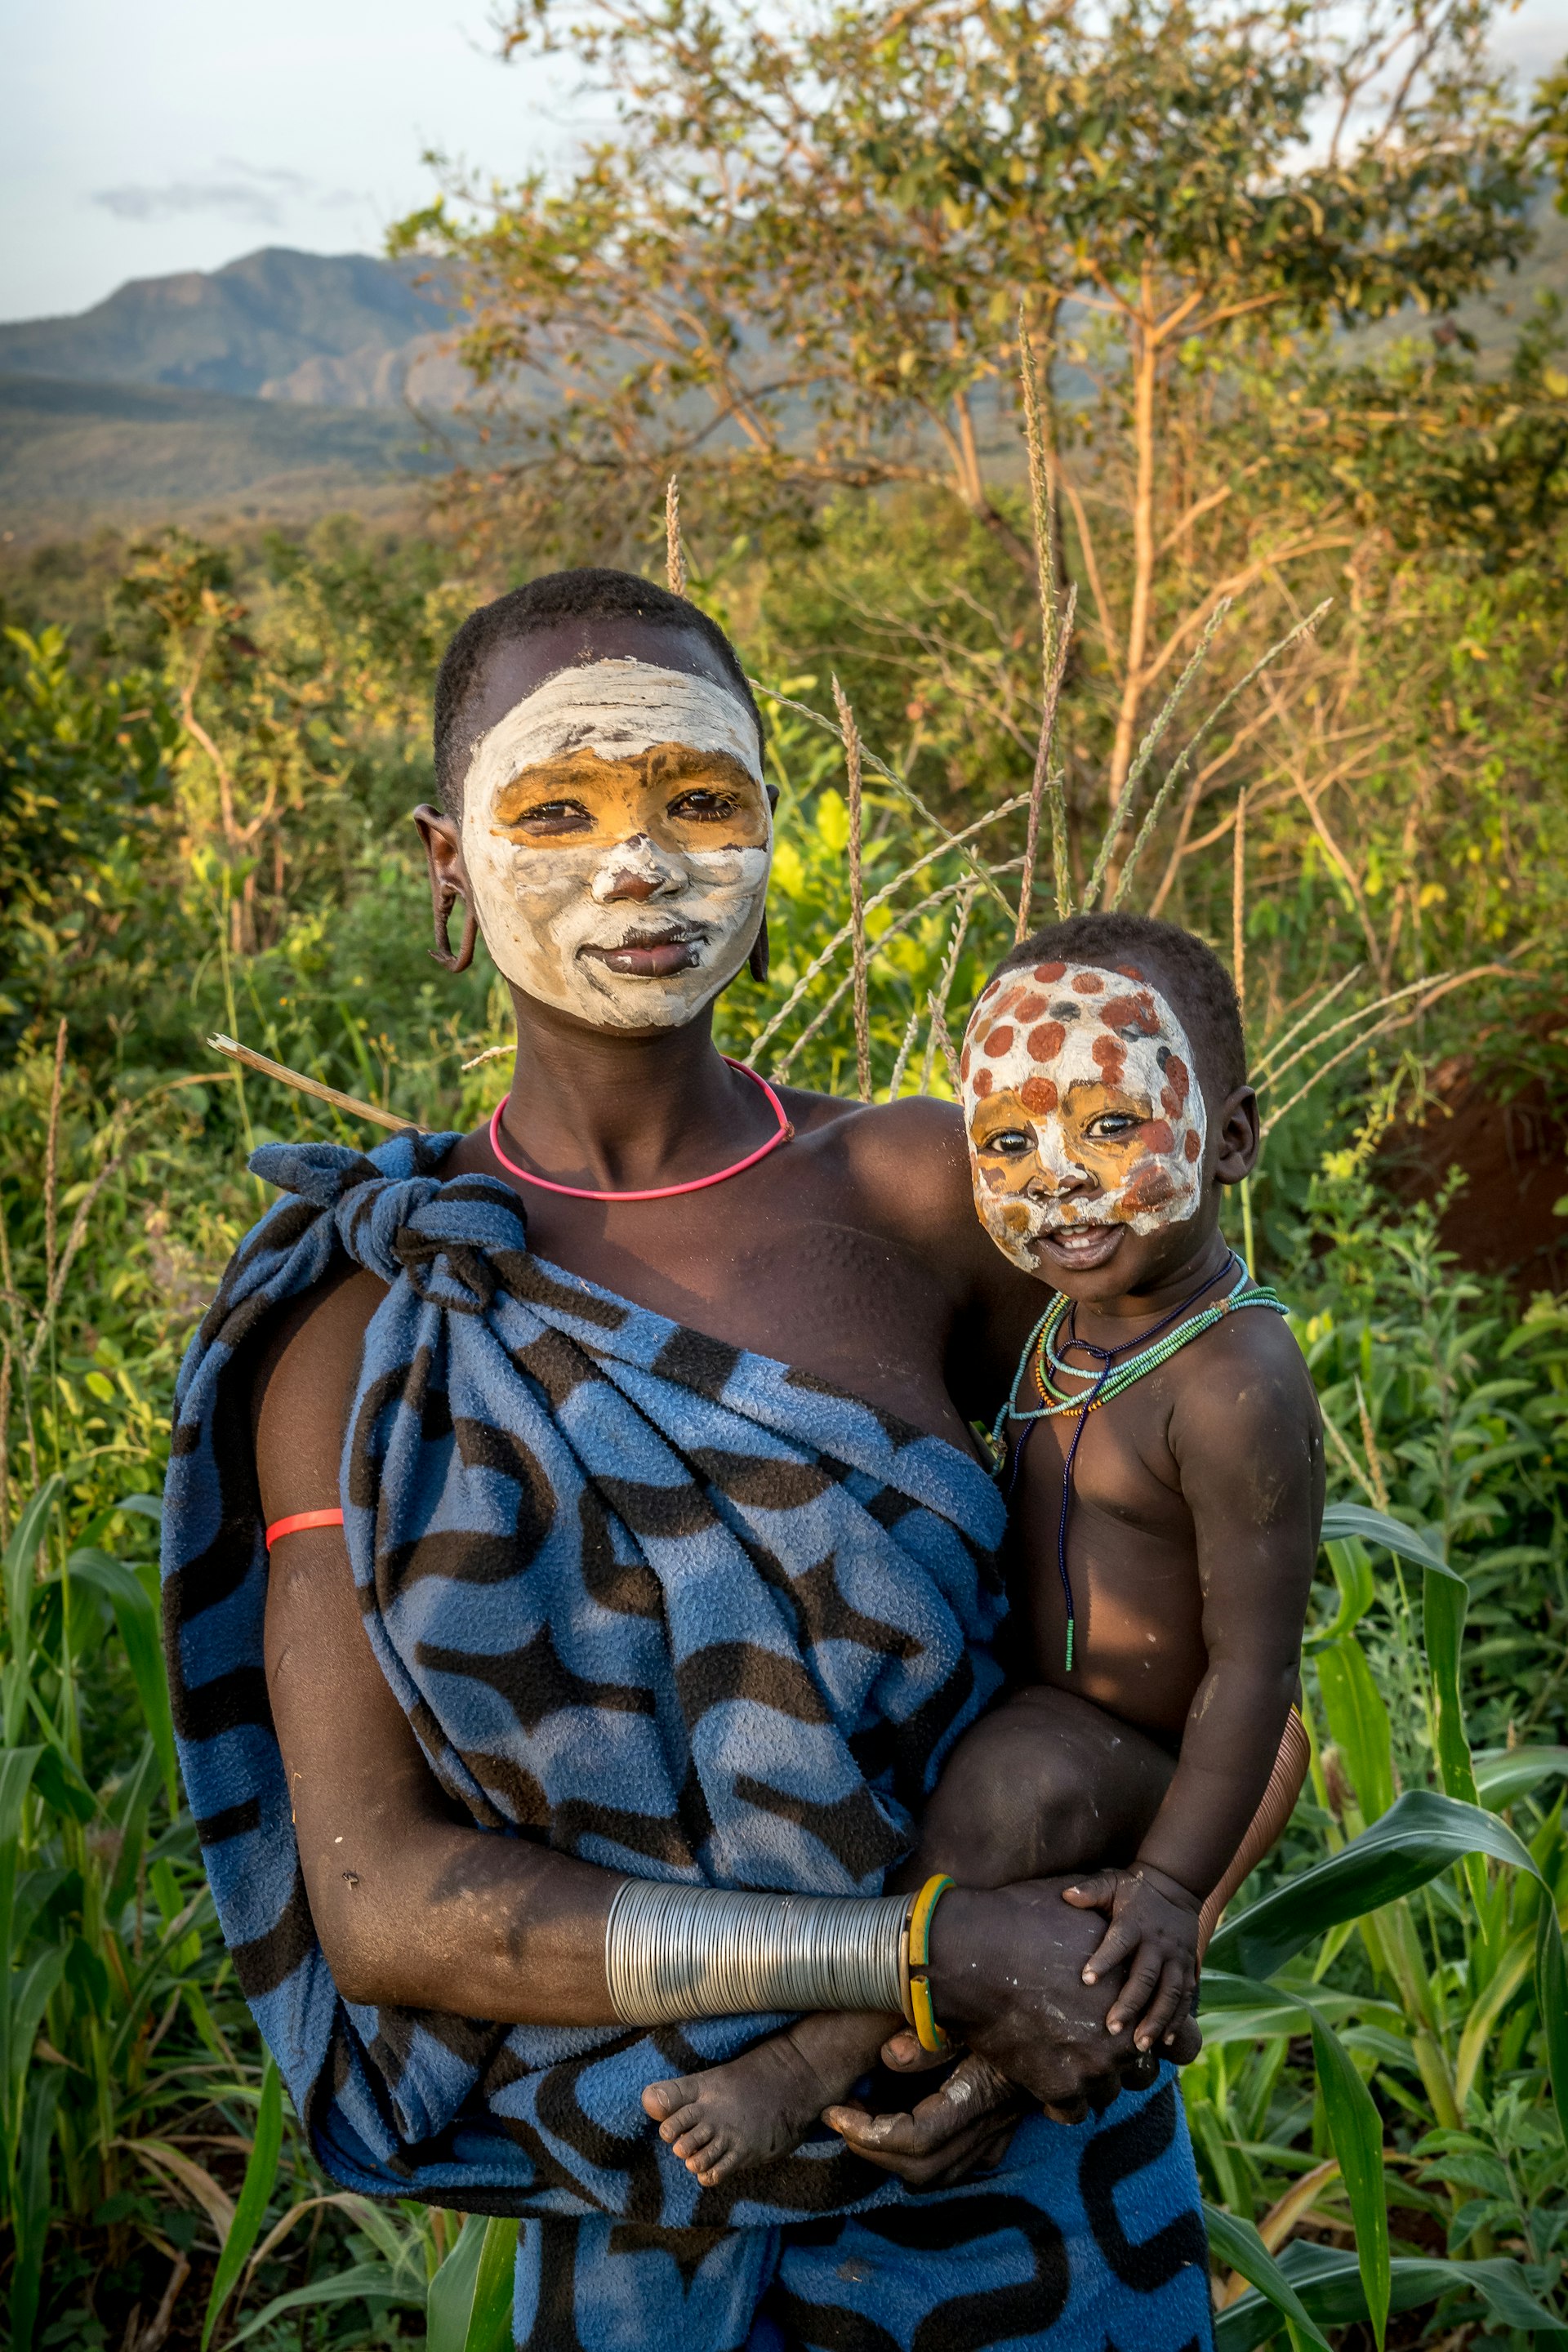 A woman holds a child. They both have their faces decorated with white and gold paint